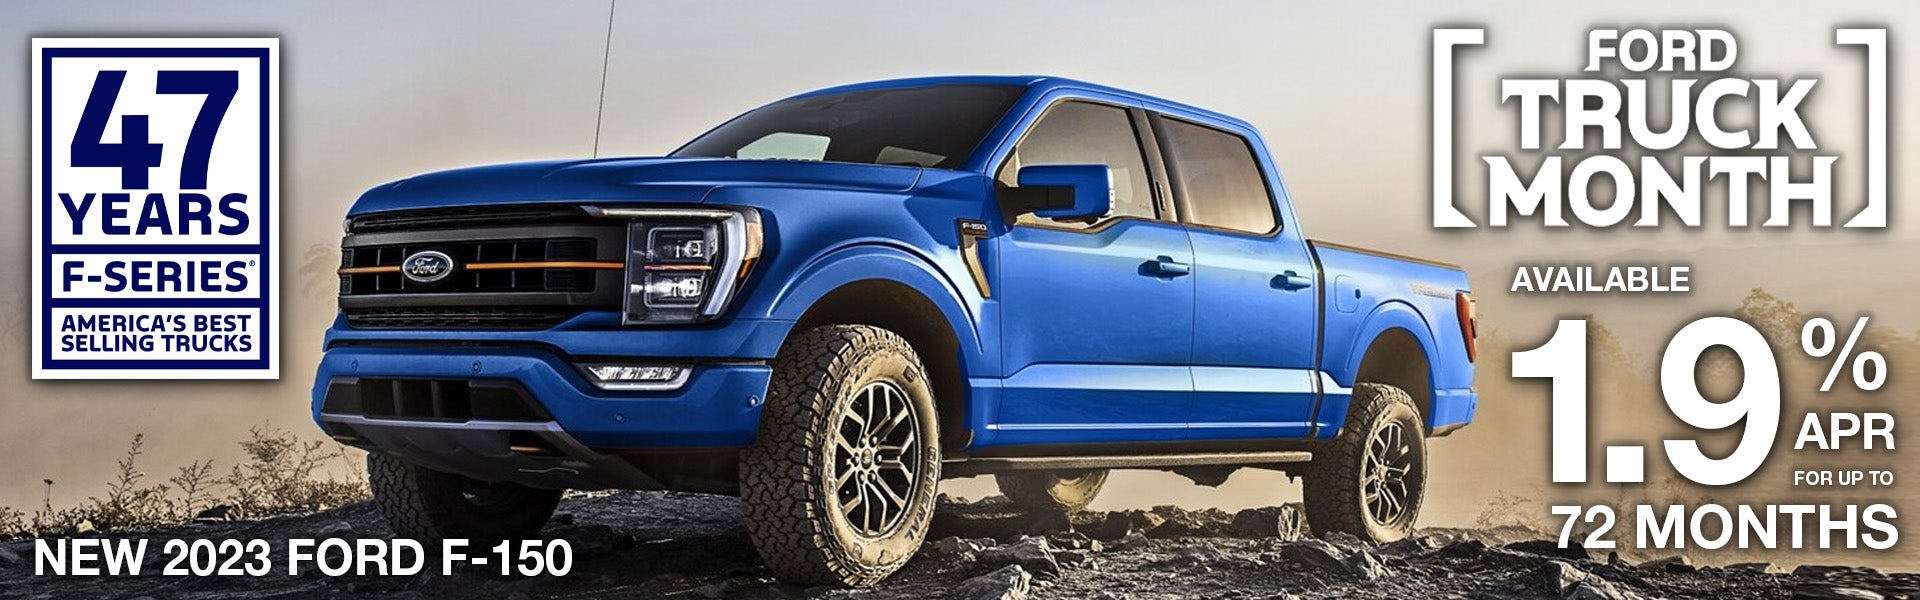 Ford F-150 for a great rate